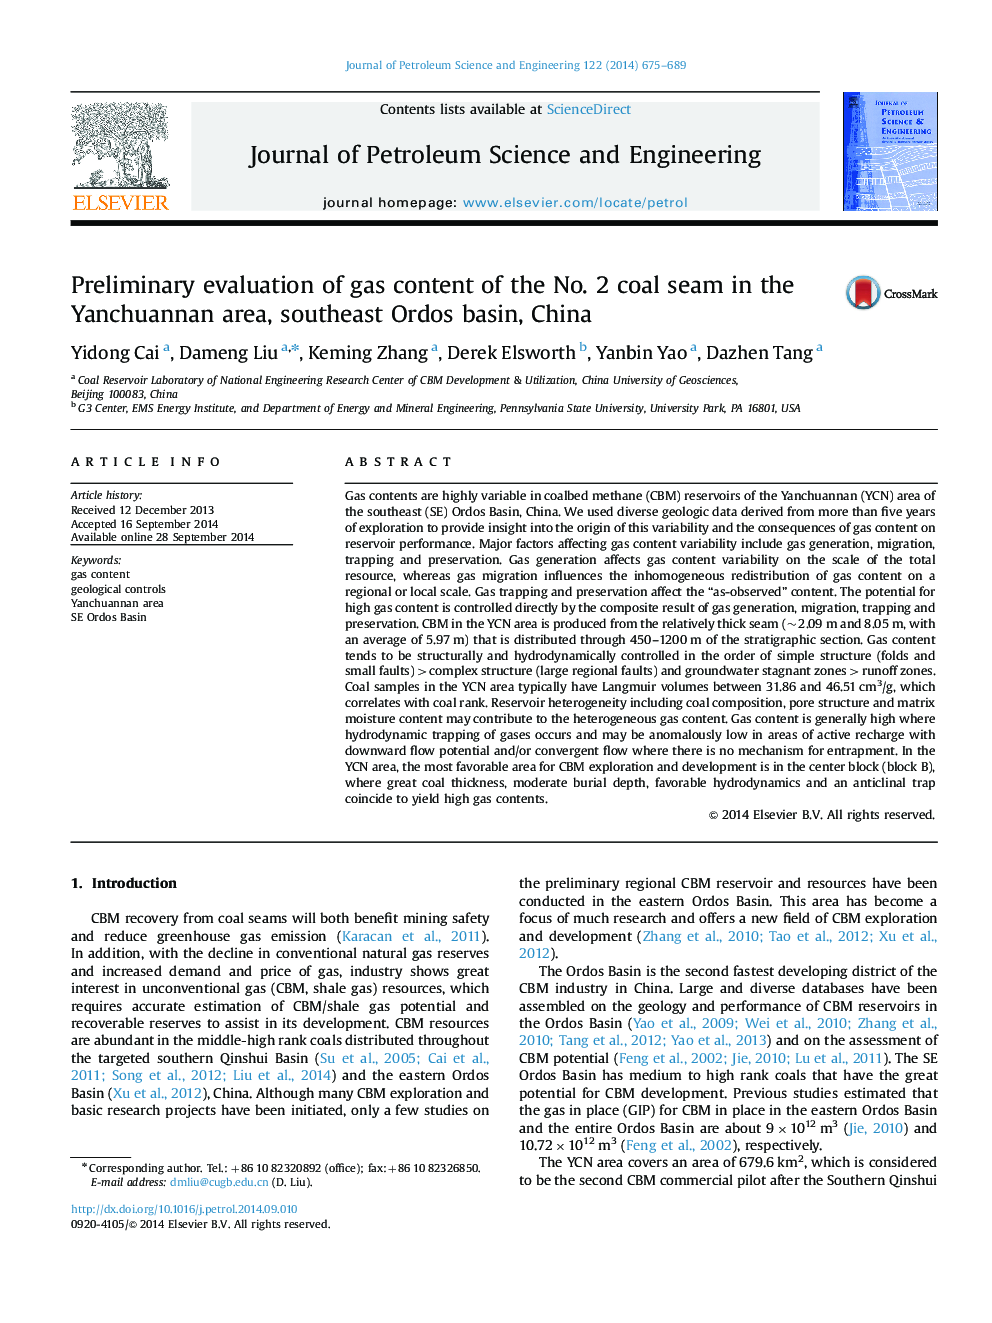 Preliminary evaluation of gas content of the No. 2 coal seam in the Yanchuannan area, southeast Ordos basin, China